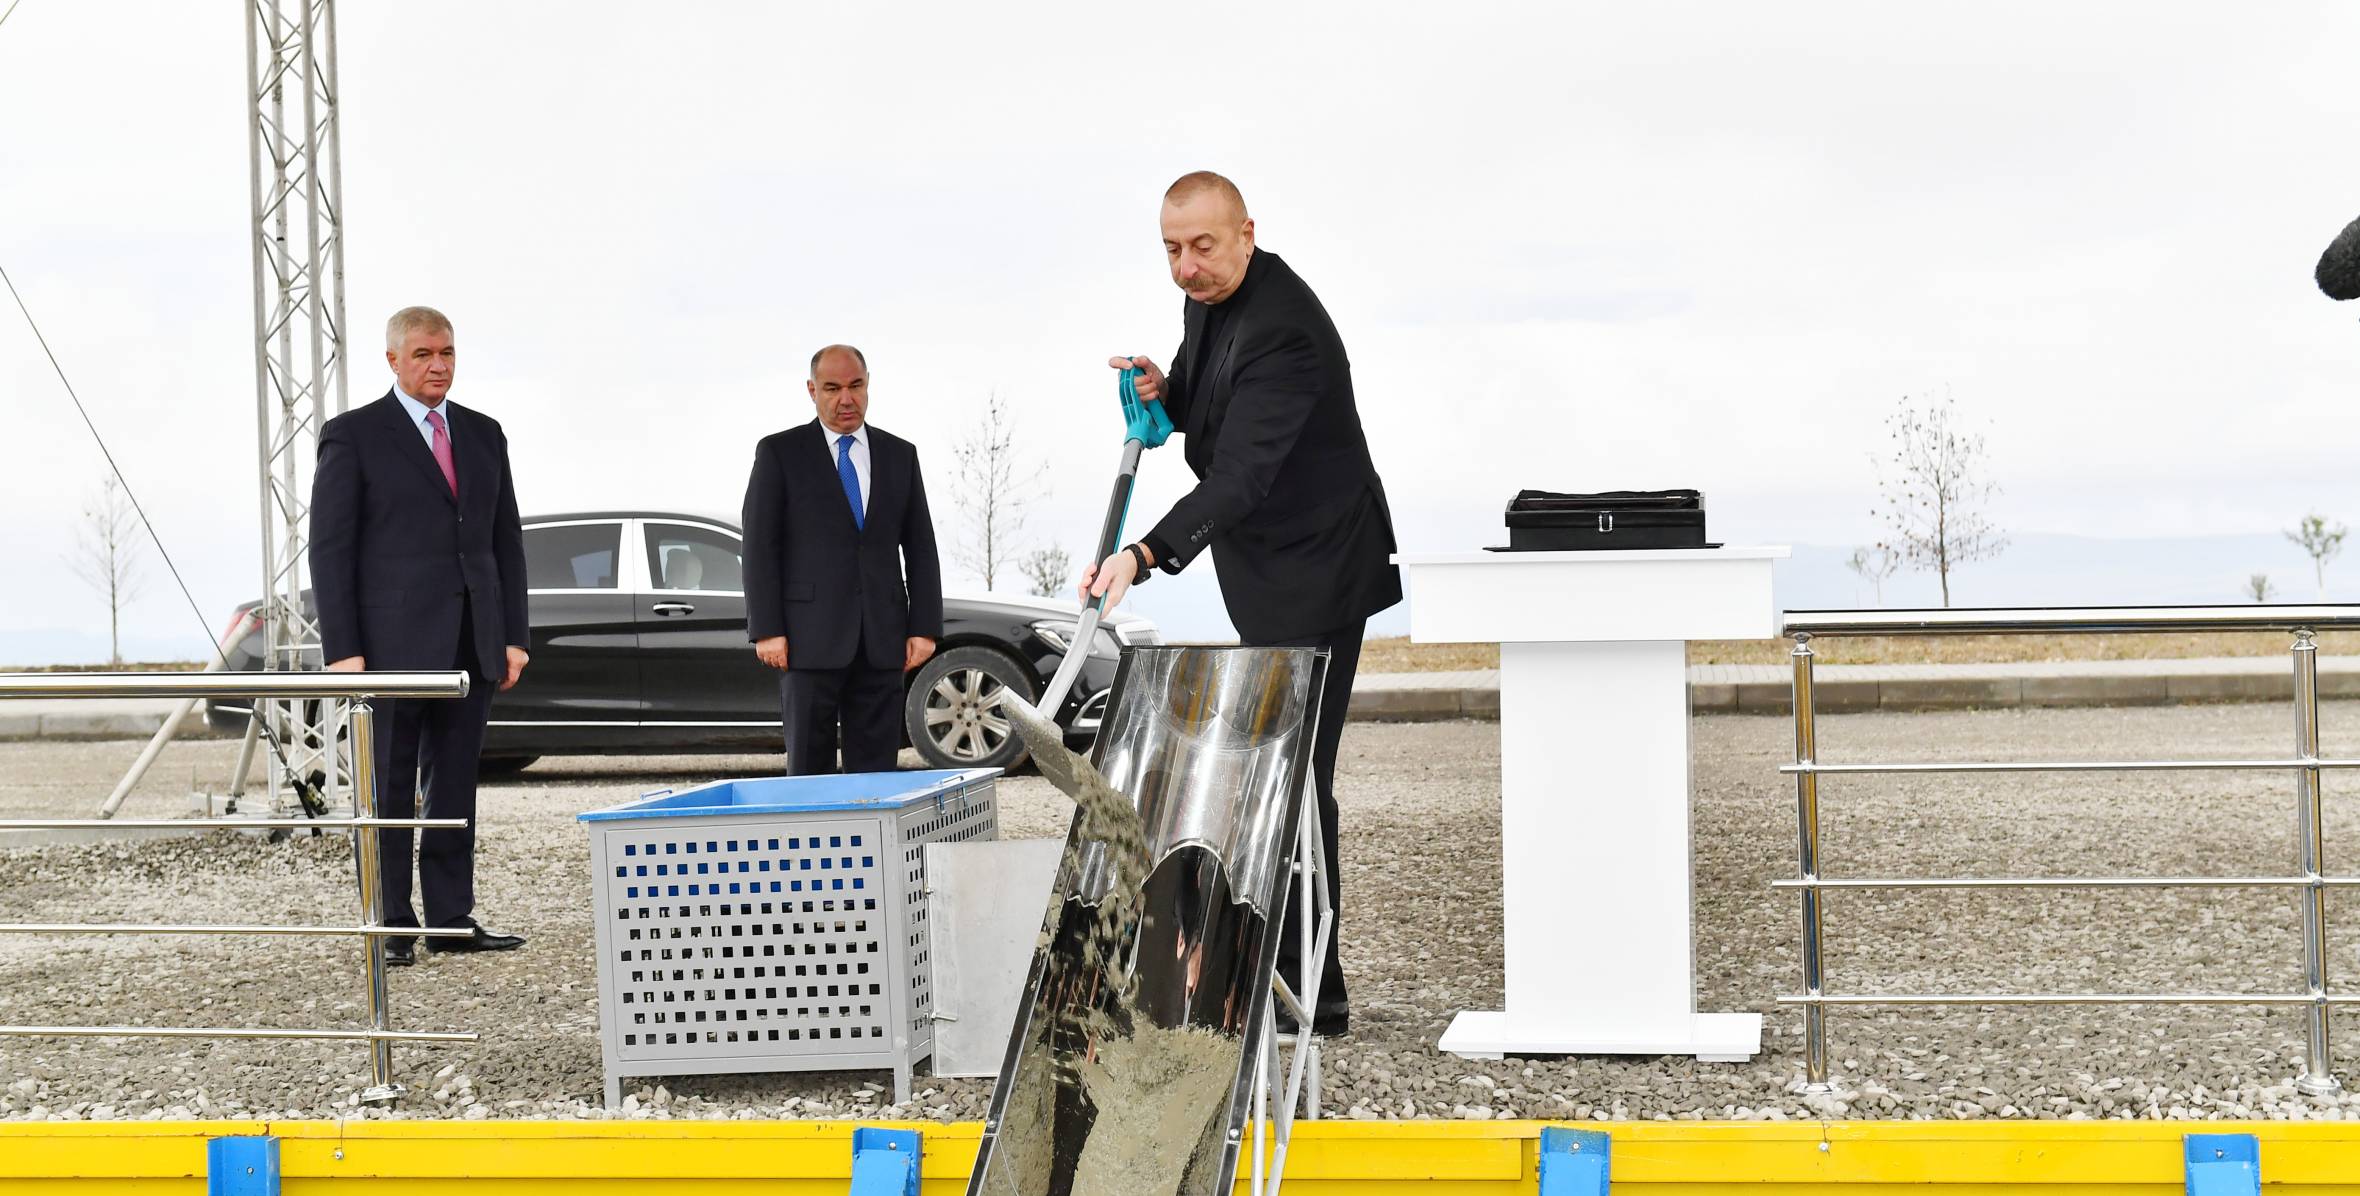 Ilham Aliyev laid the foundation stone for the new plant at “Shaki-Oghuz” Agropark in Oghuz district